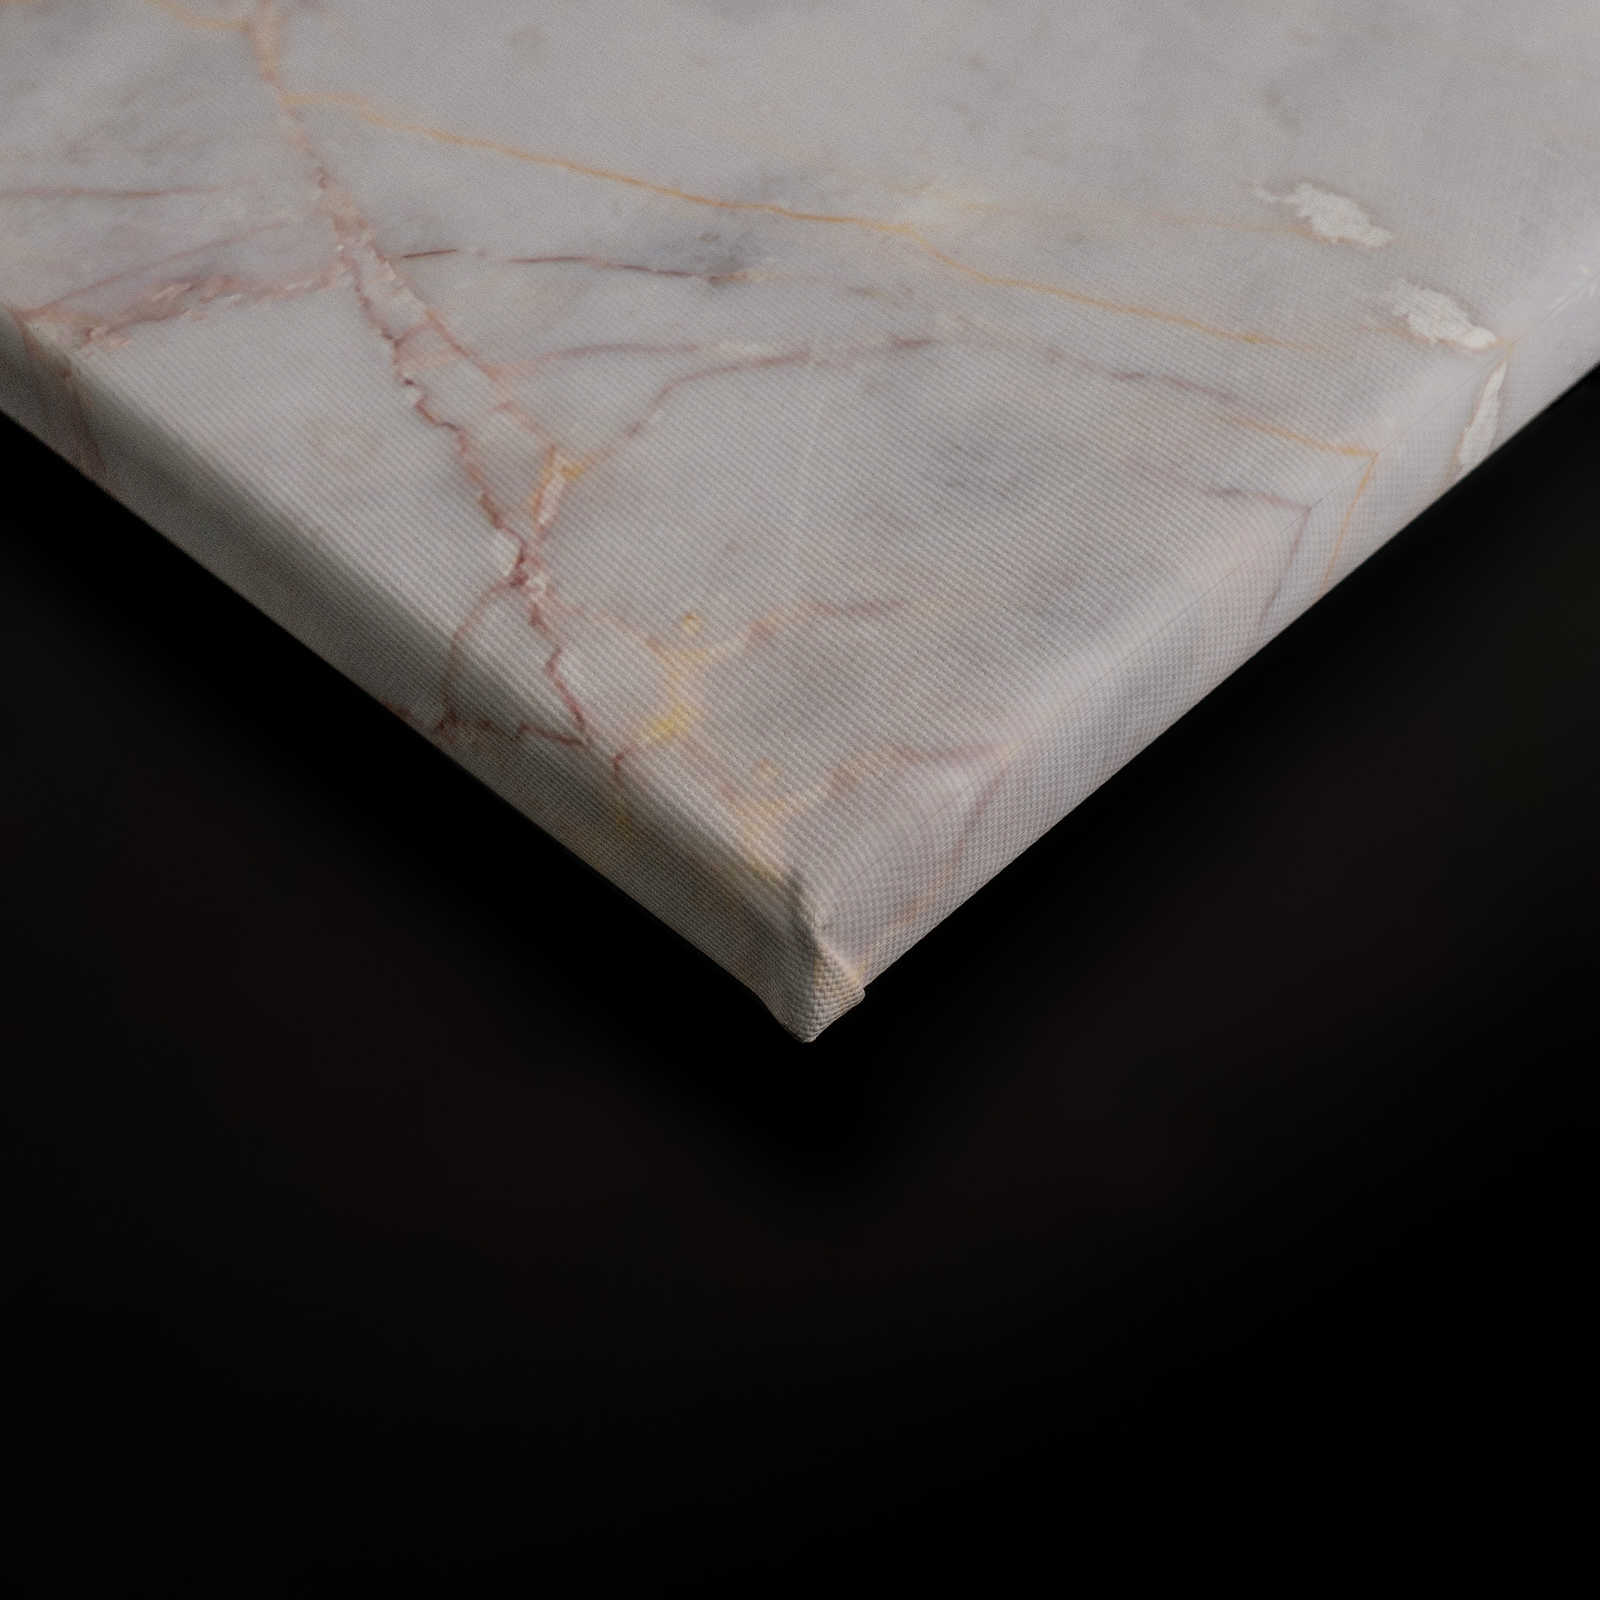             Canvas with natural stone surface with cracks - 0.90 m x 0.60 m
        